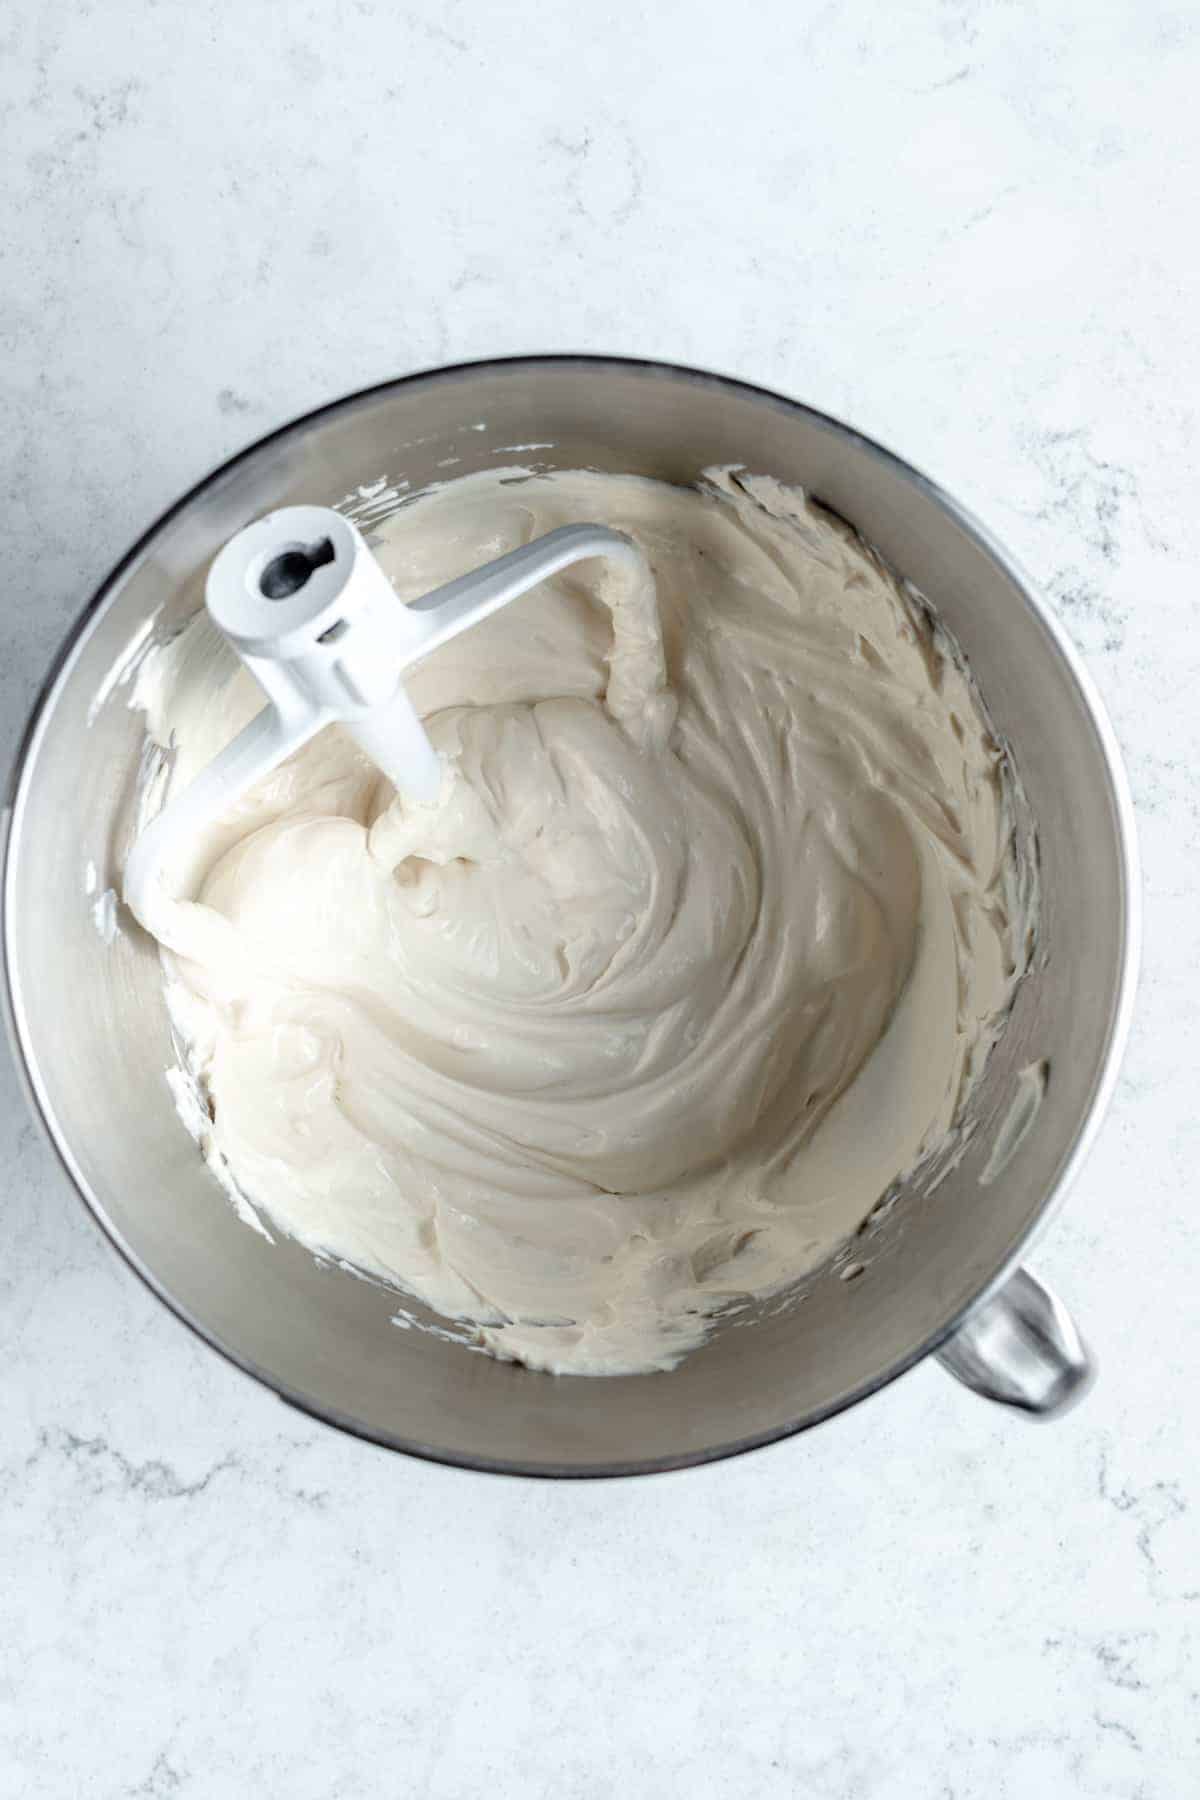 Beaten cream cheese in a mixing bowl.